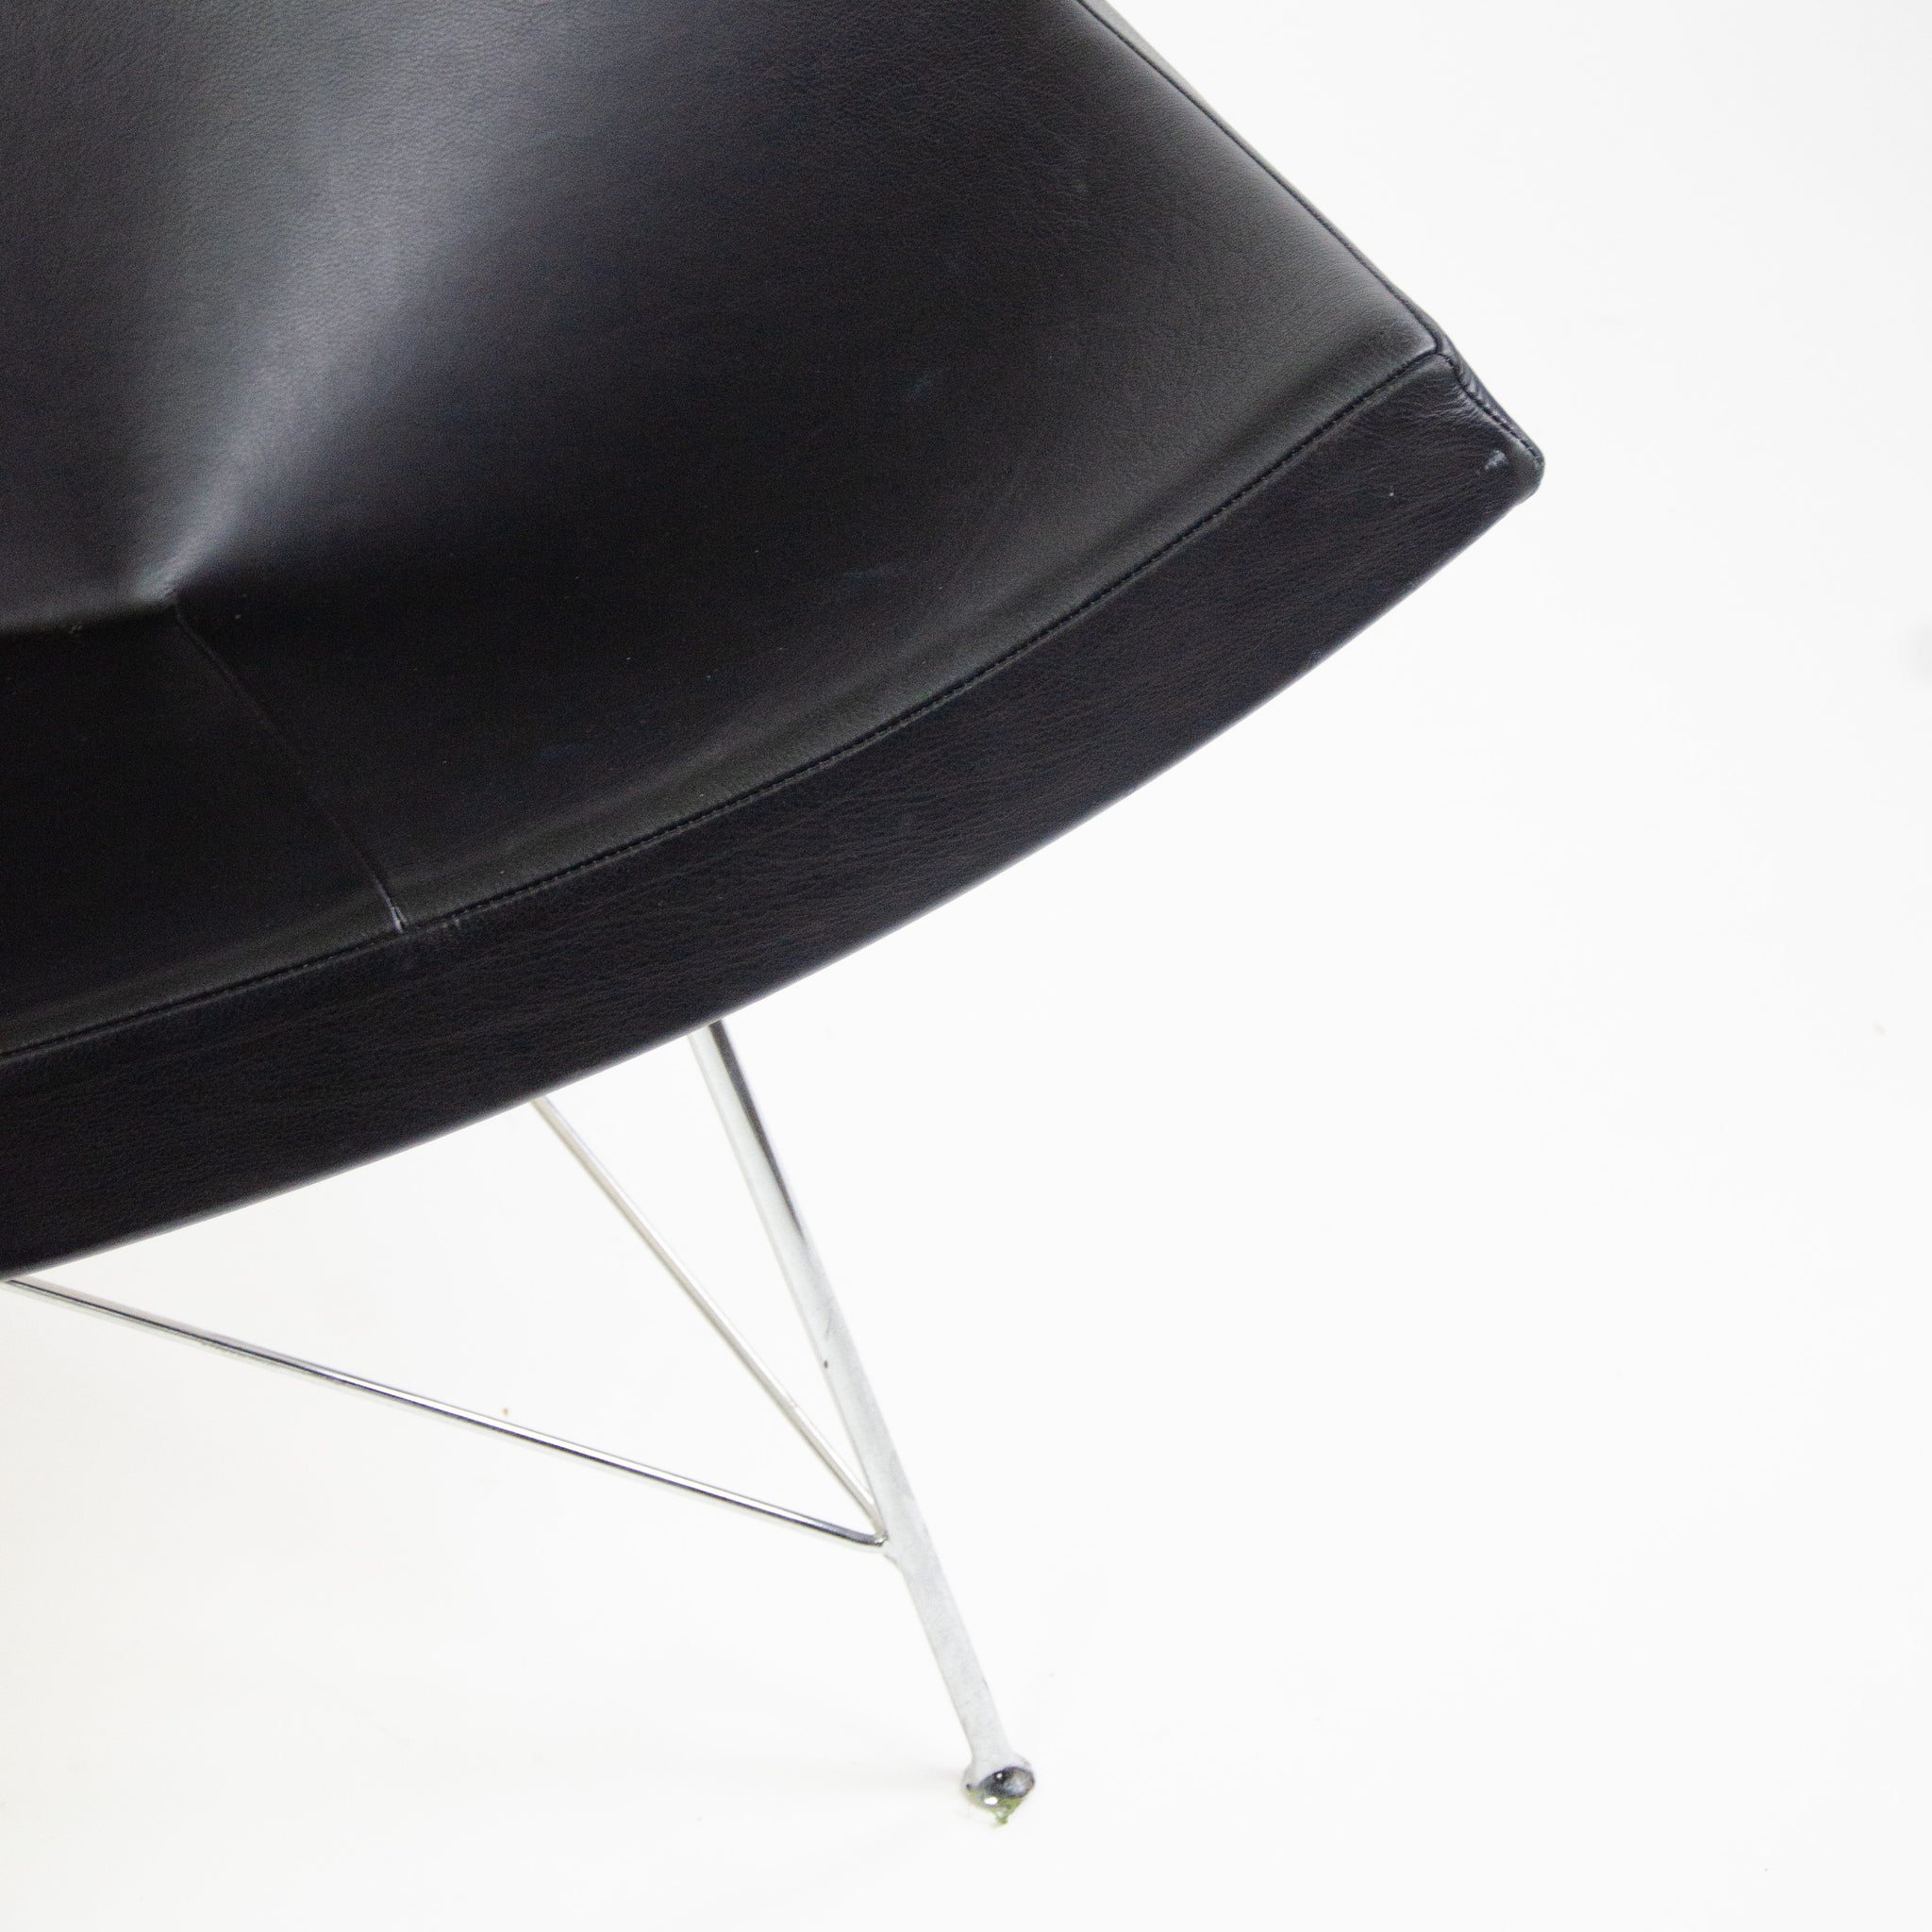 SOLD 2003 Vitra Herman Miller George Nelson Coconut Chair Black Leather MINT 2x Available